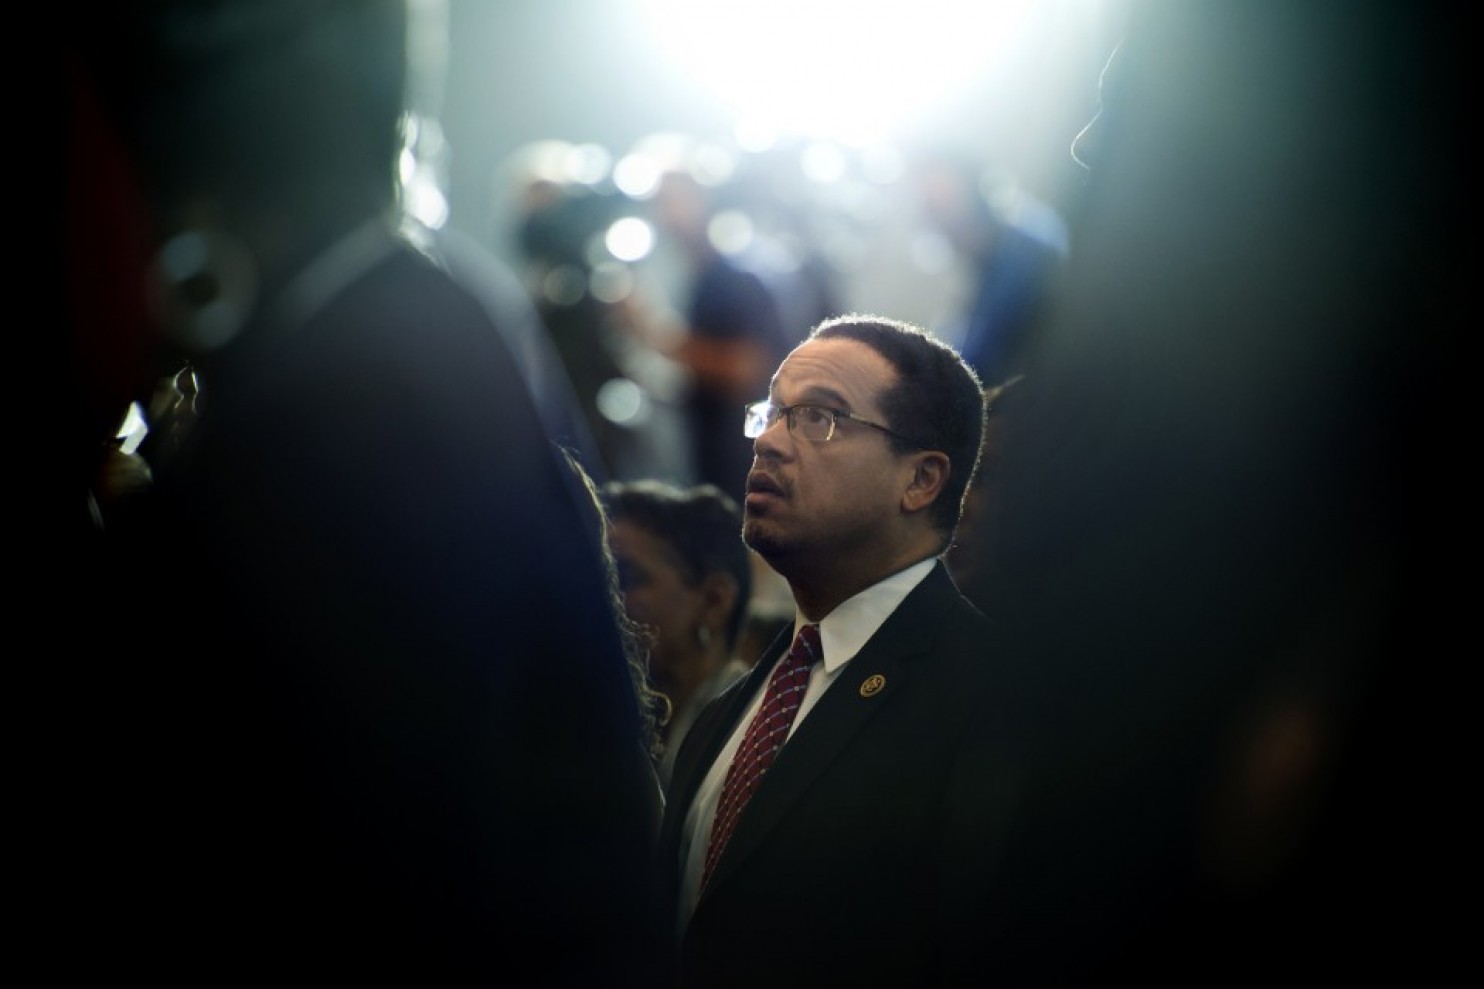 Keith Ellison would be a bold pick for DNC chair — and a controversial one